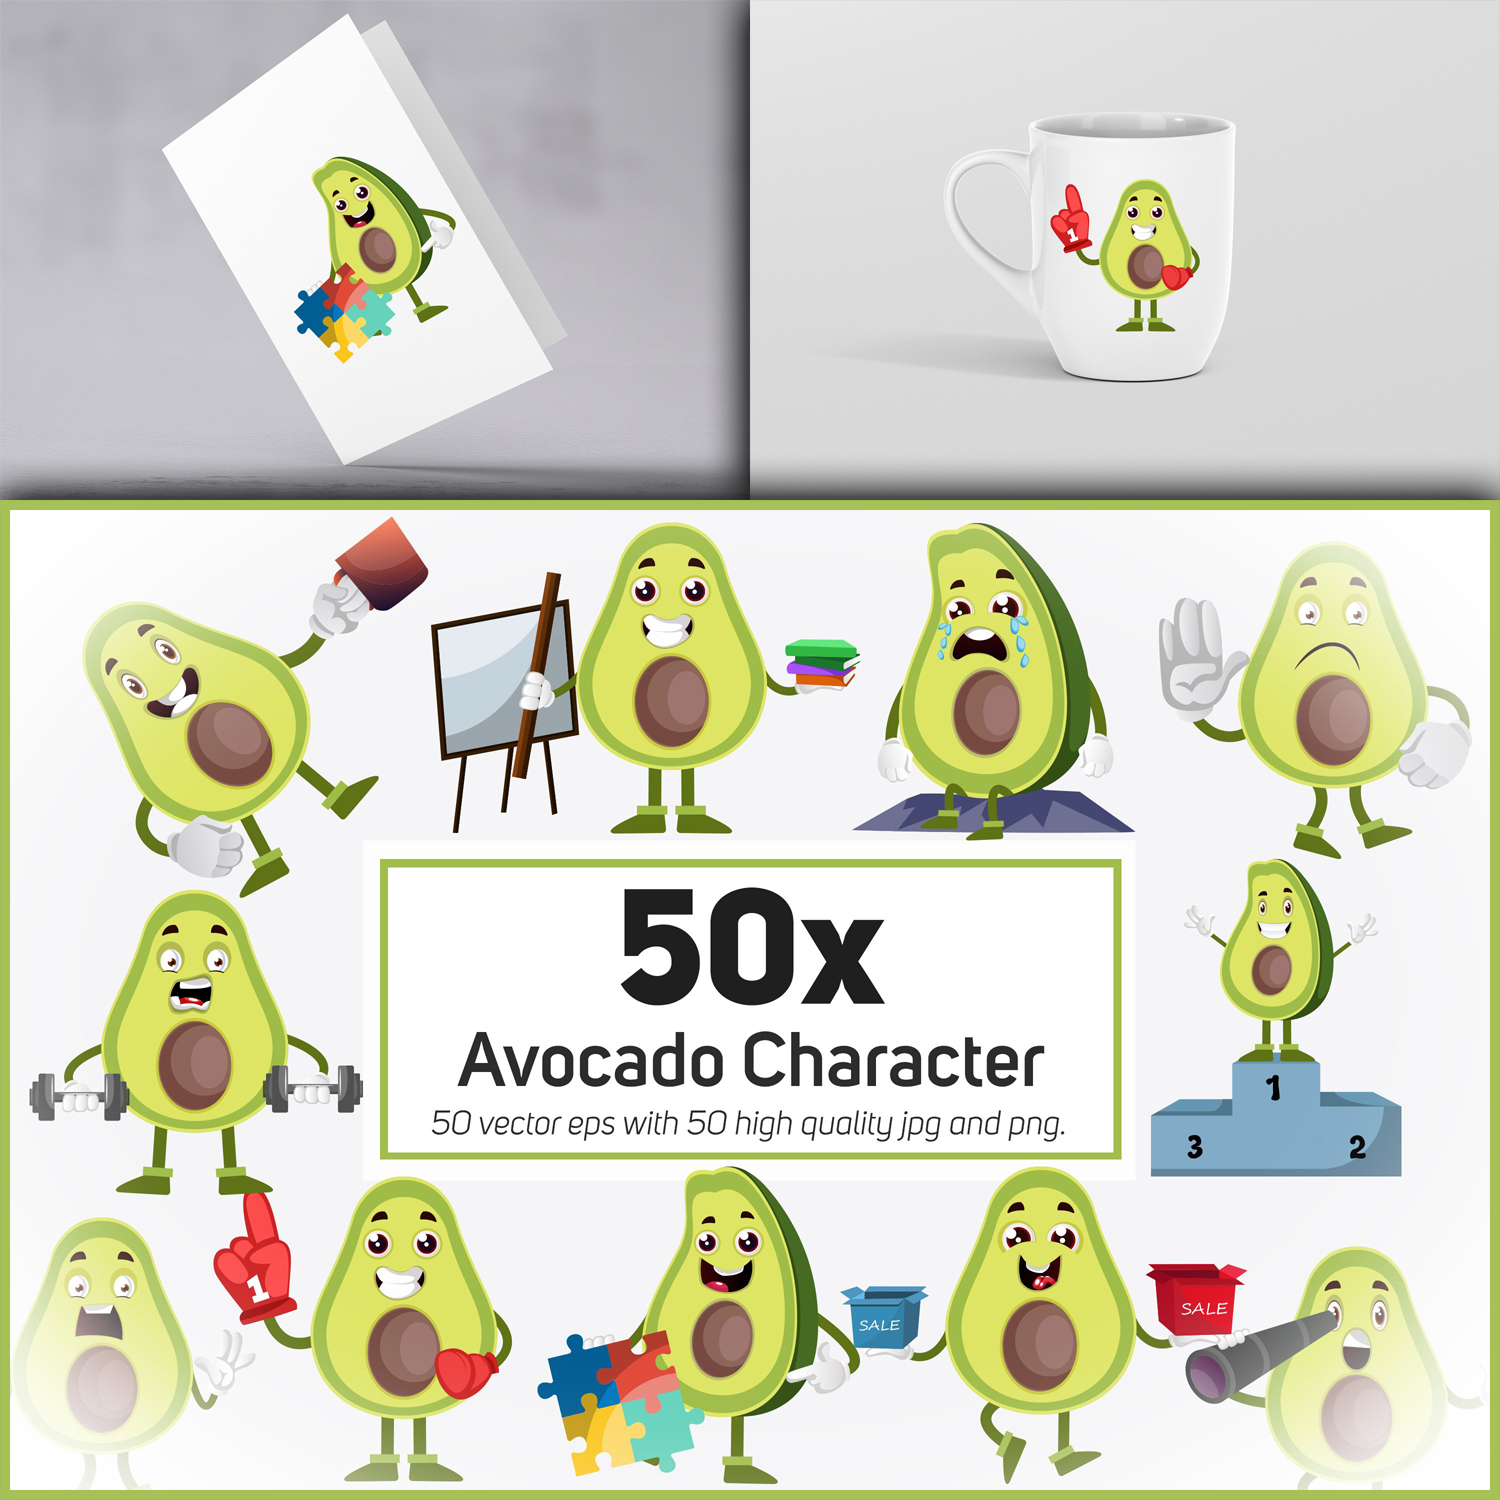 50x Avocado Character and Mascot Collection illustration. cover.